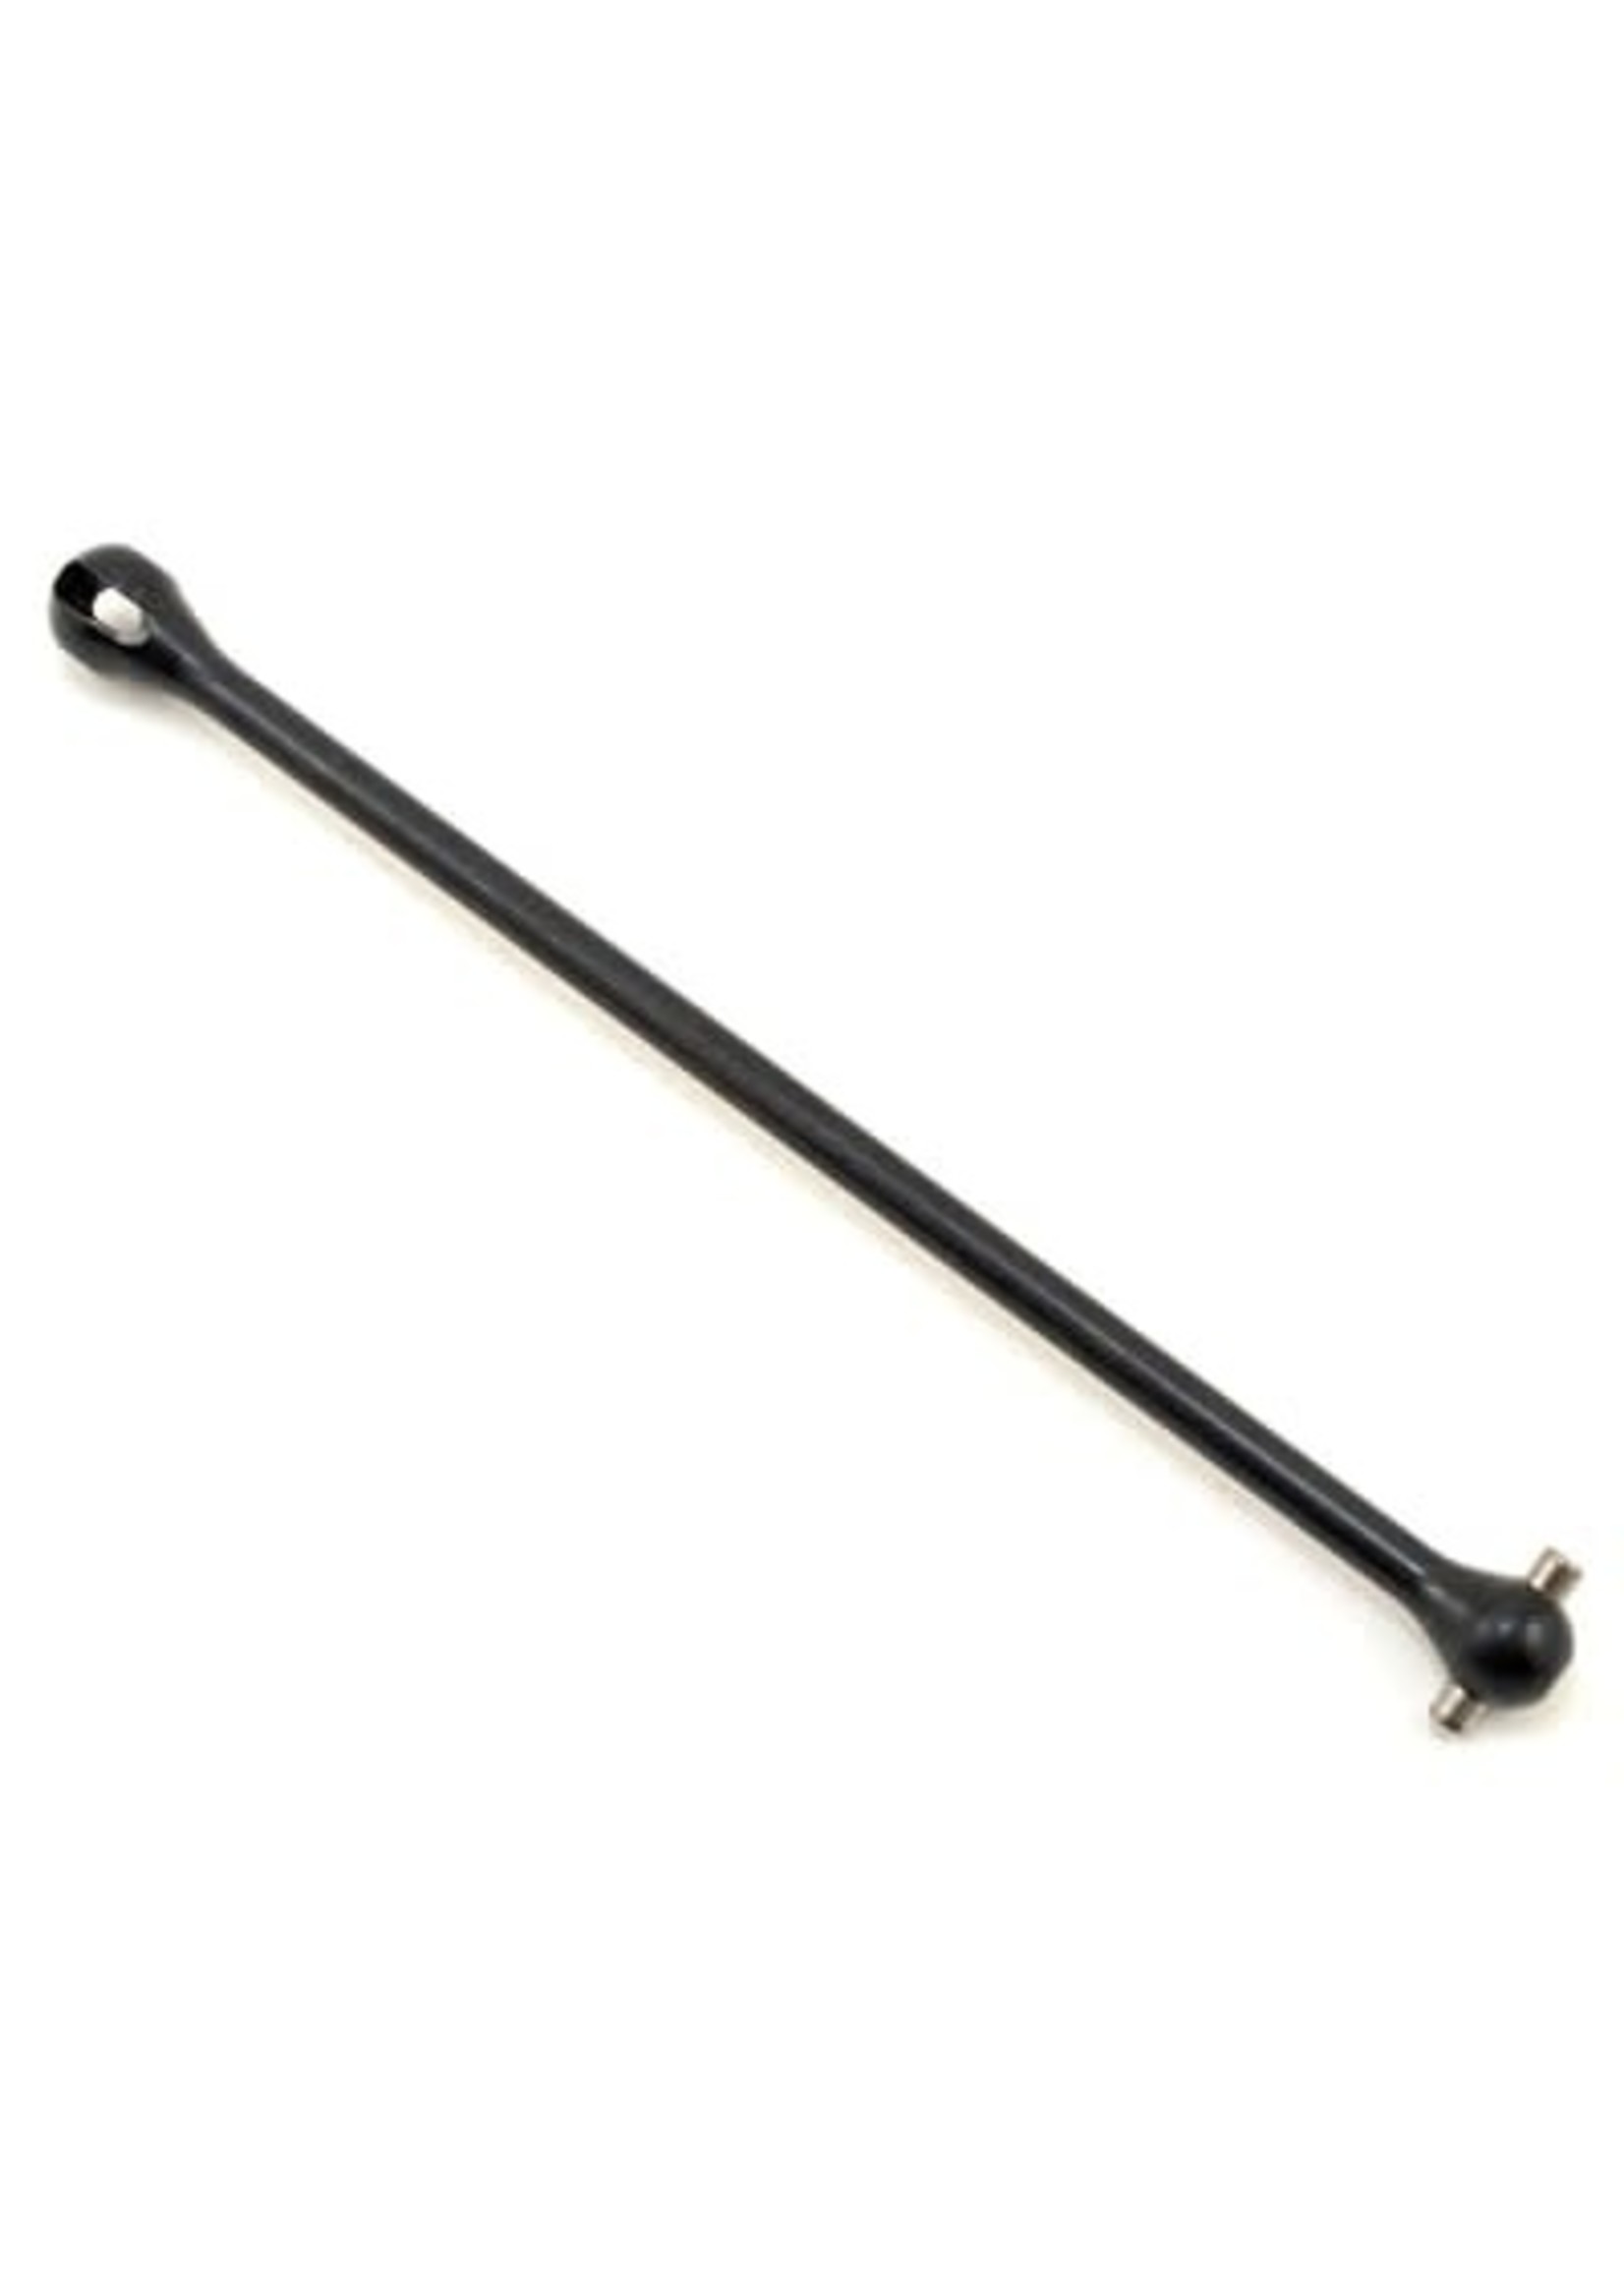 Traxxas 7750X Driveshaft, steel constant-velocity (heavy duty, shaft only, 160mm) (1) (replacing #7750 also requires #7751X, #7754X and #7768, #7768R, or #7768G)